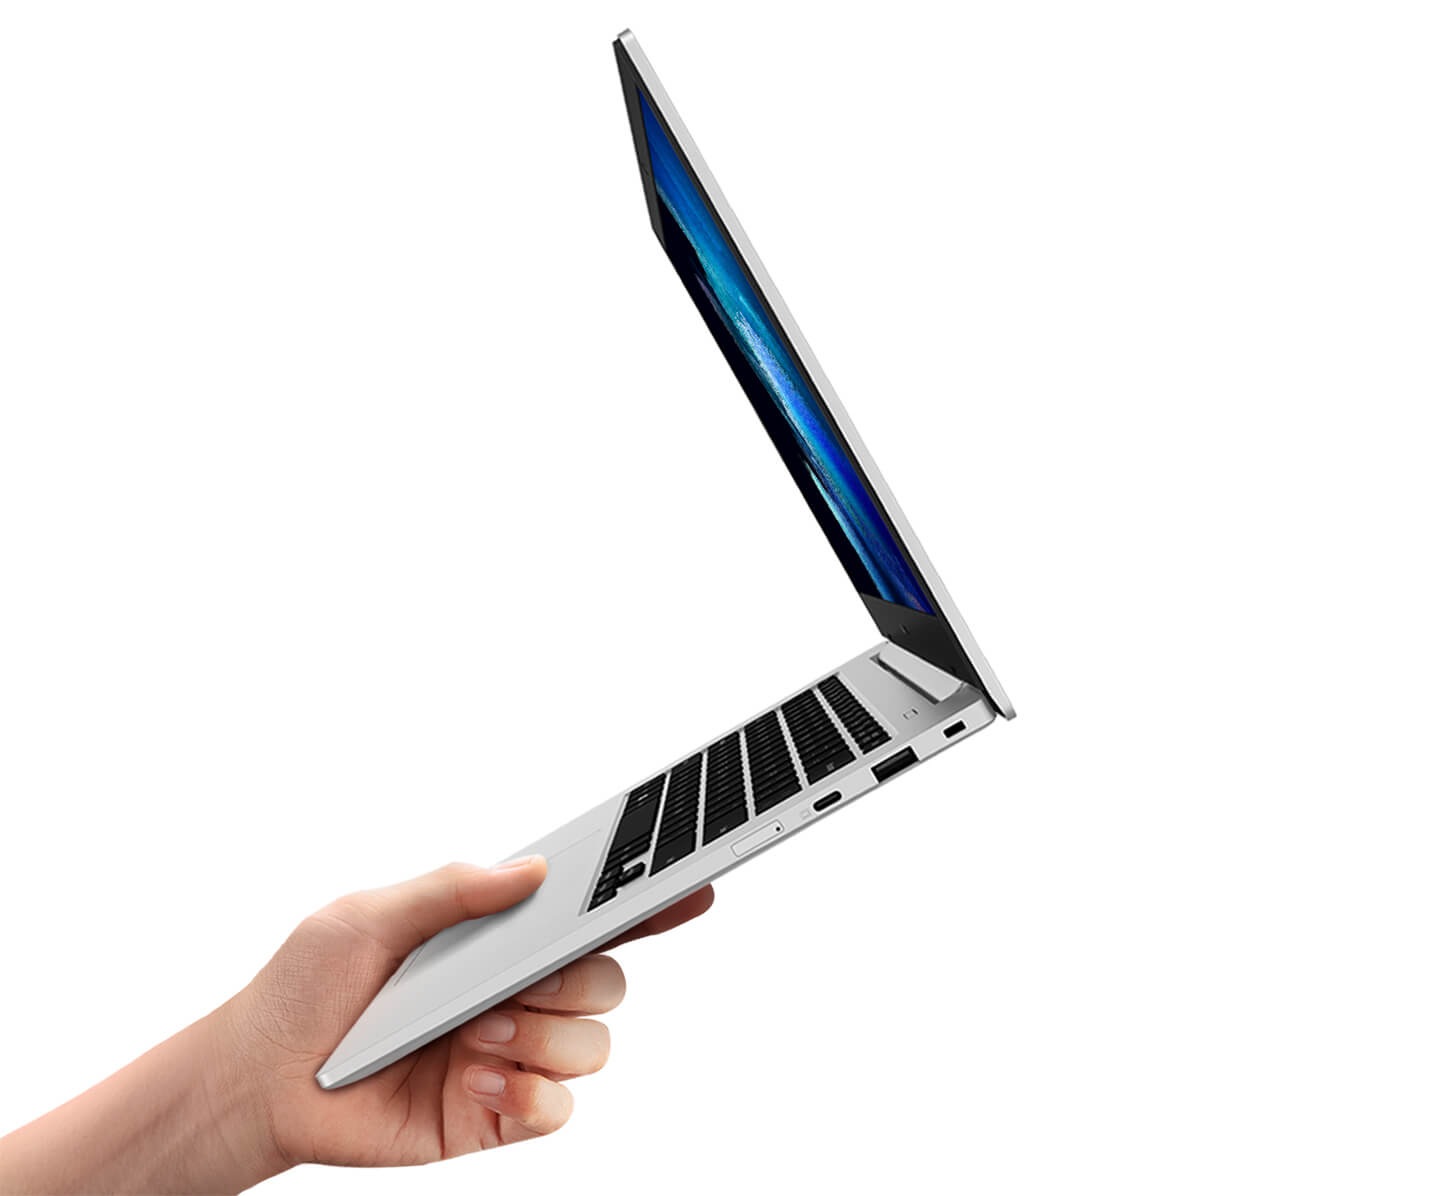 A hand holds Galaxy Book Go. The computer is seen from the side showing some of the ports and is unfolded with a graphic wallpaper on the display.